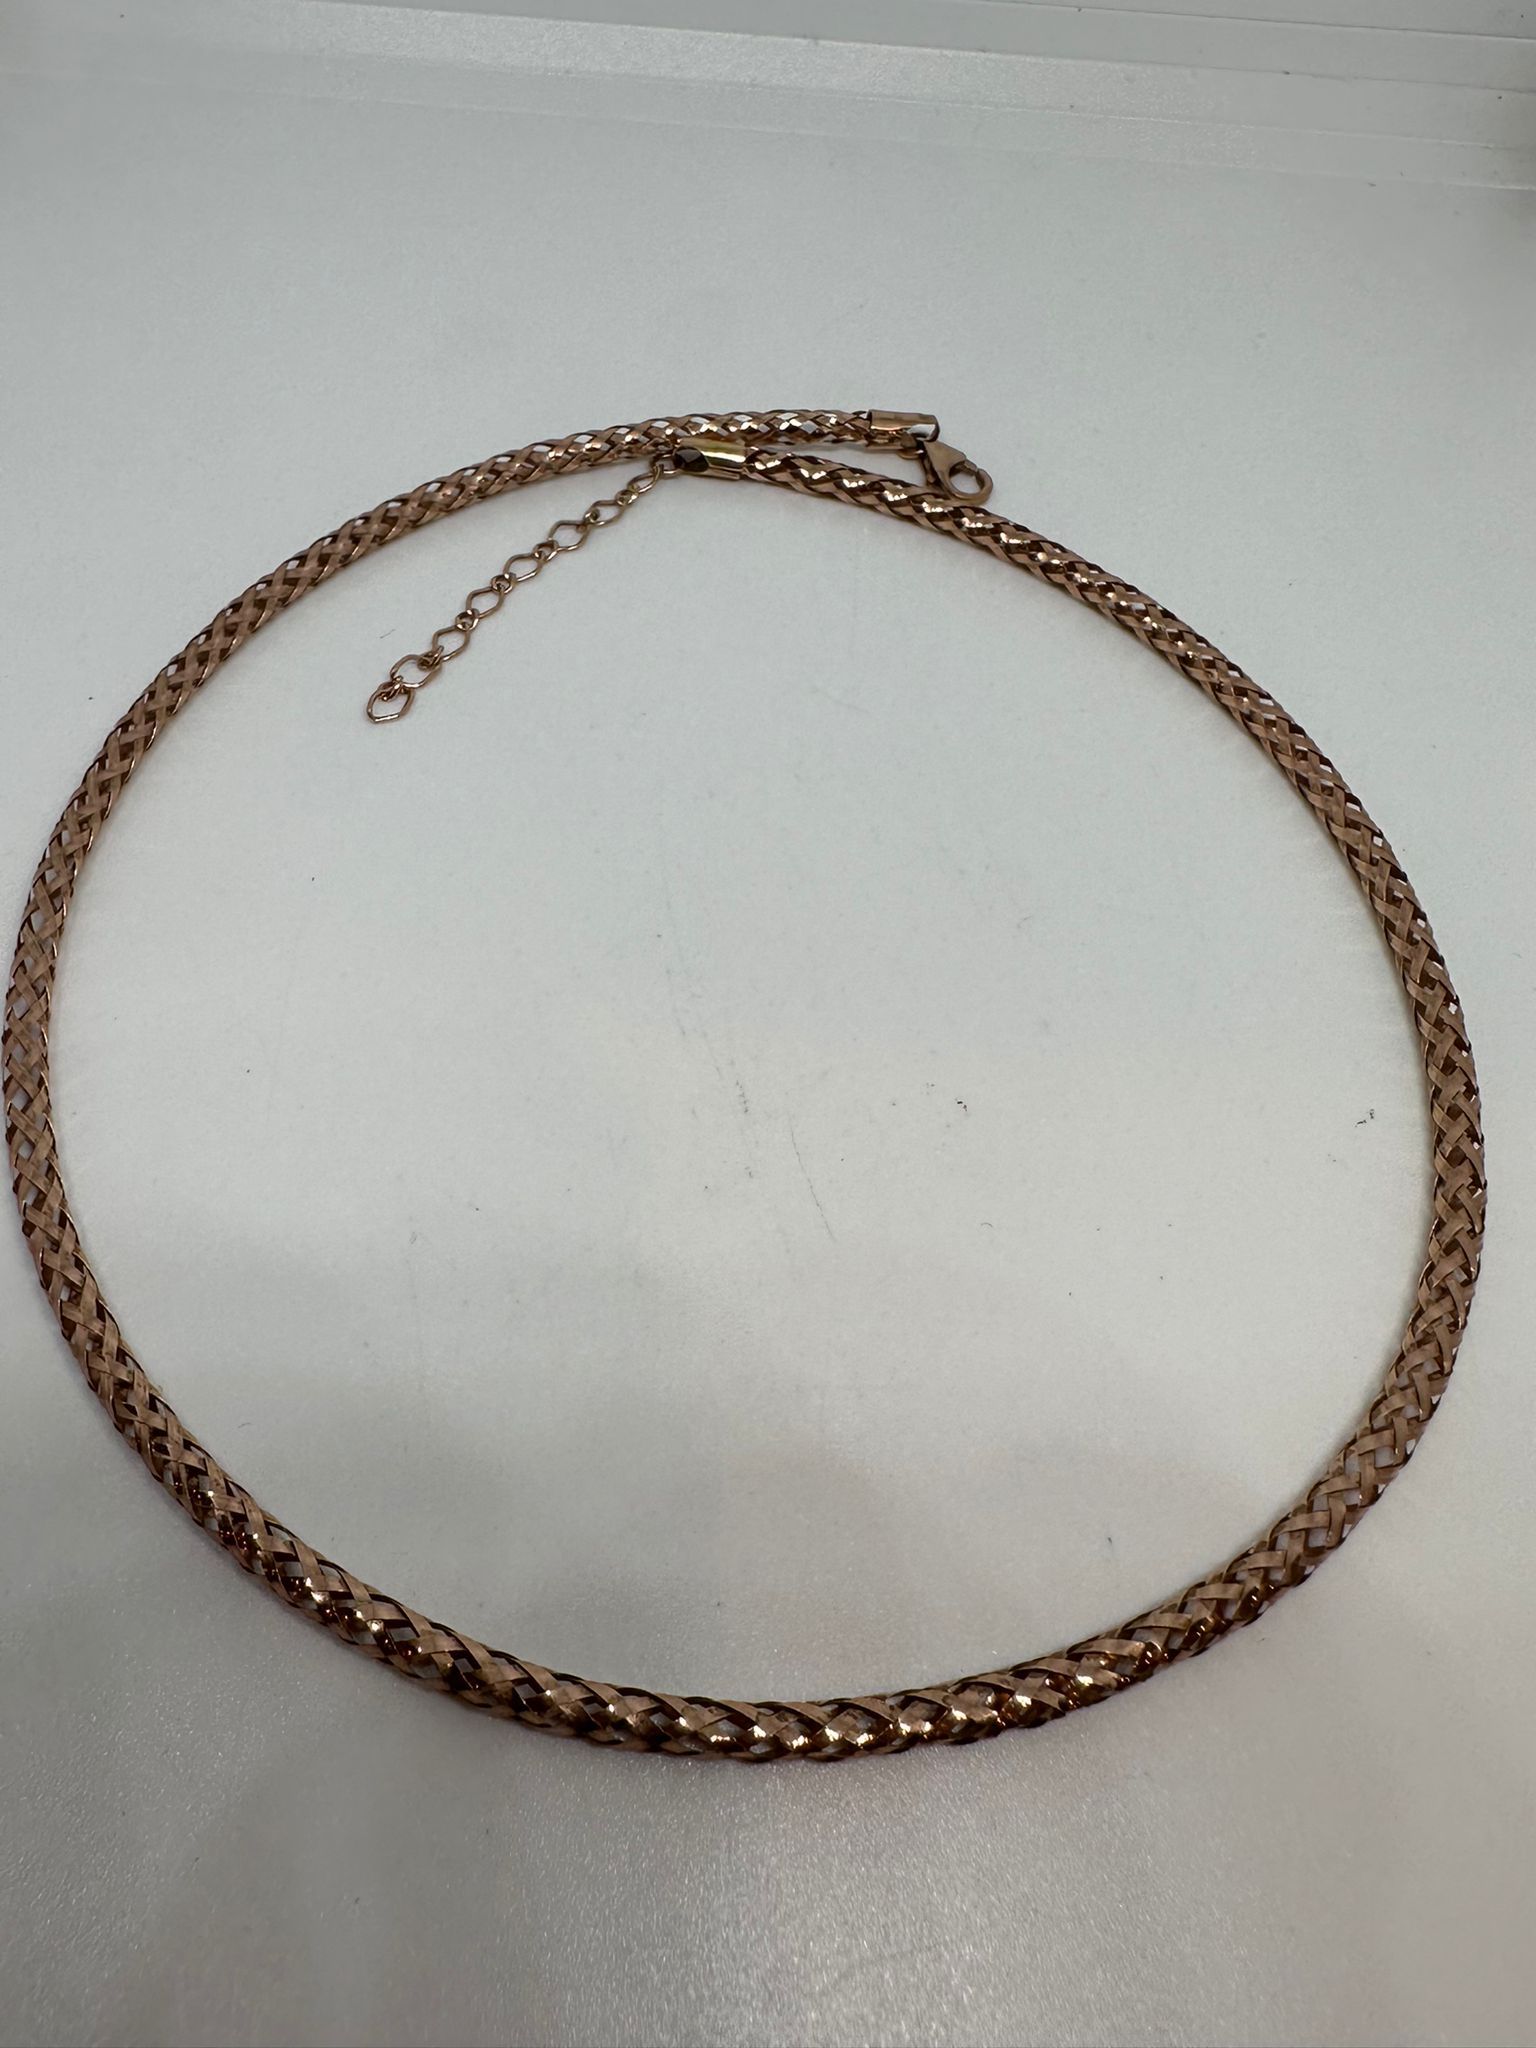 9ct rose gold adjustable chain